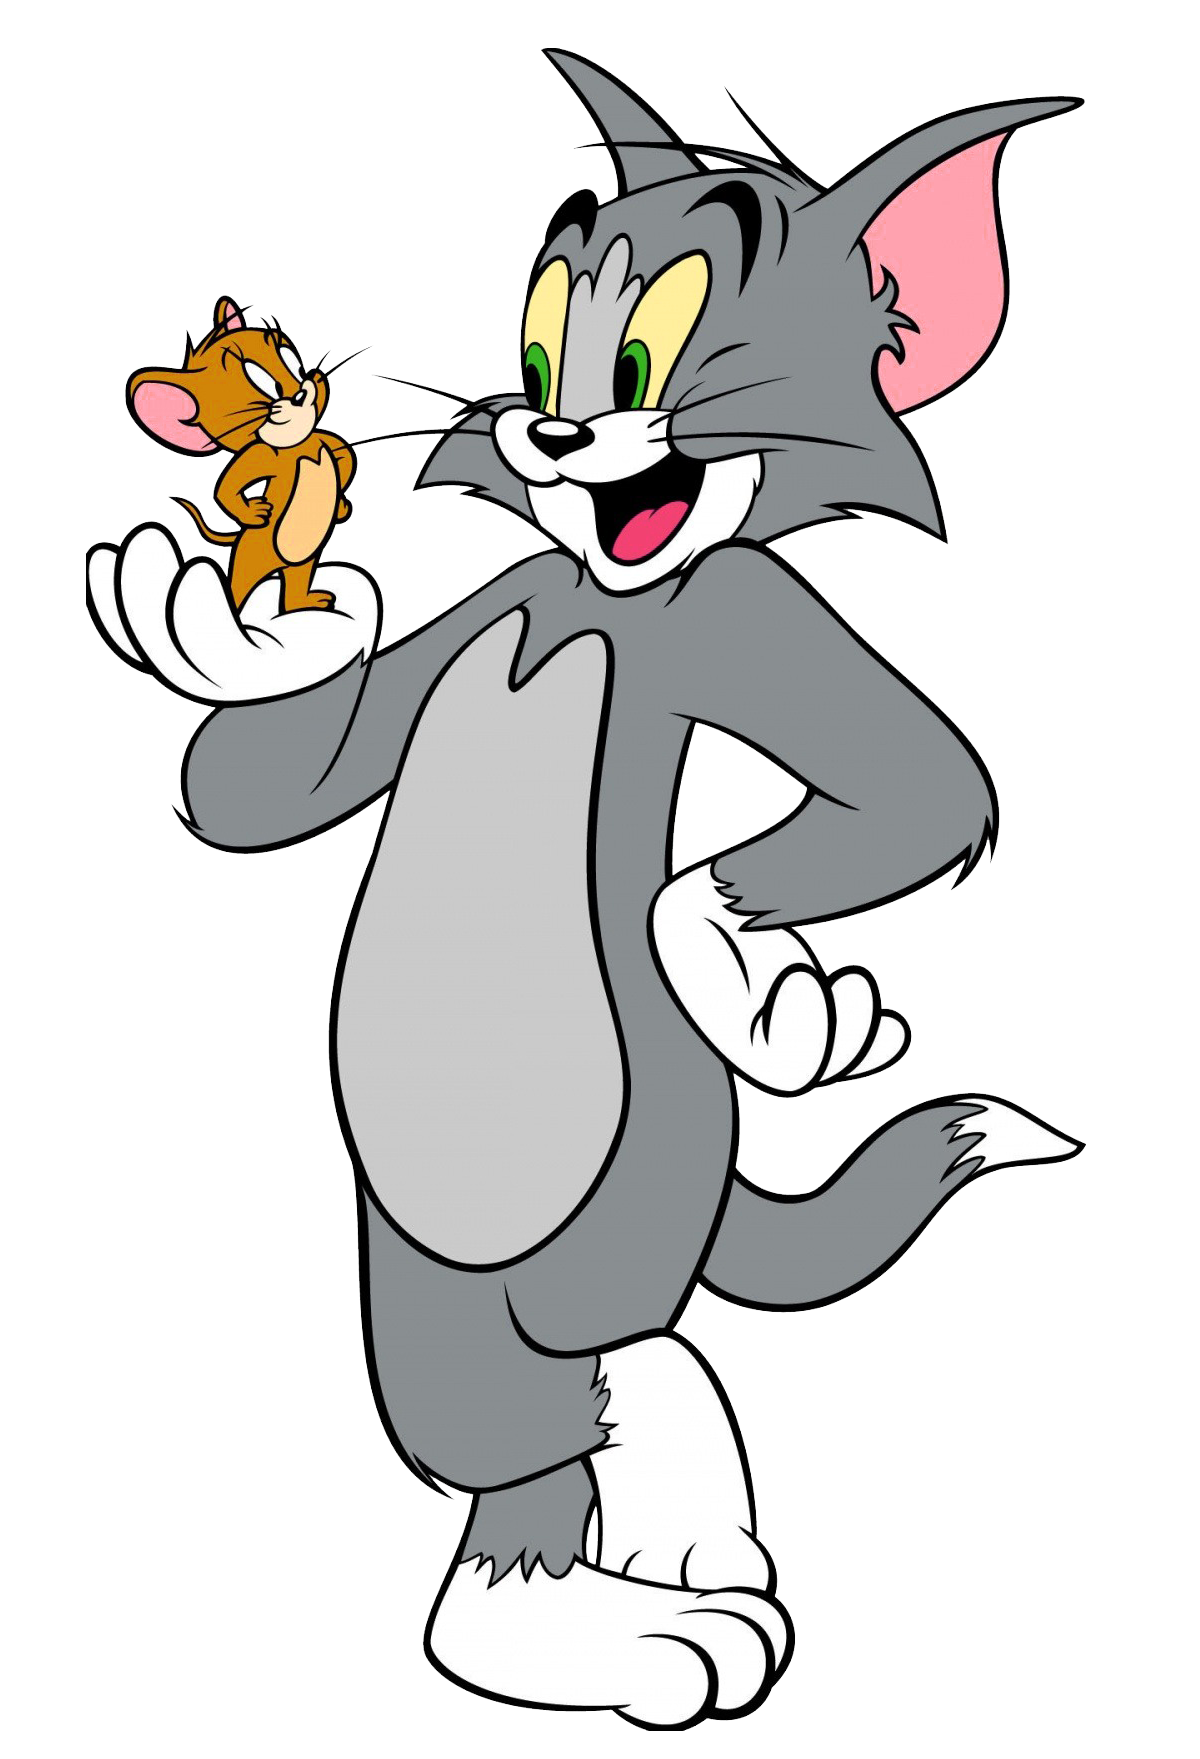 Image tom and jerry. Facebook clipart thumbnail